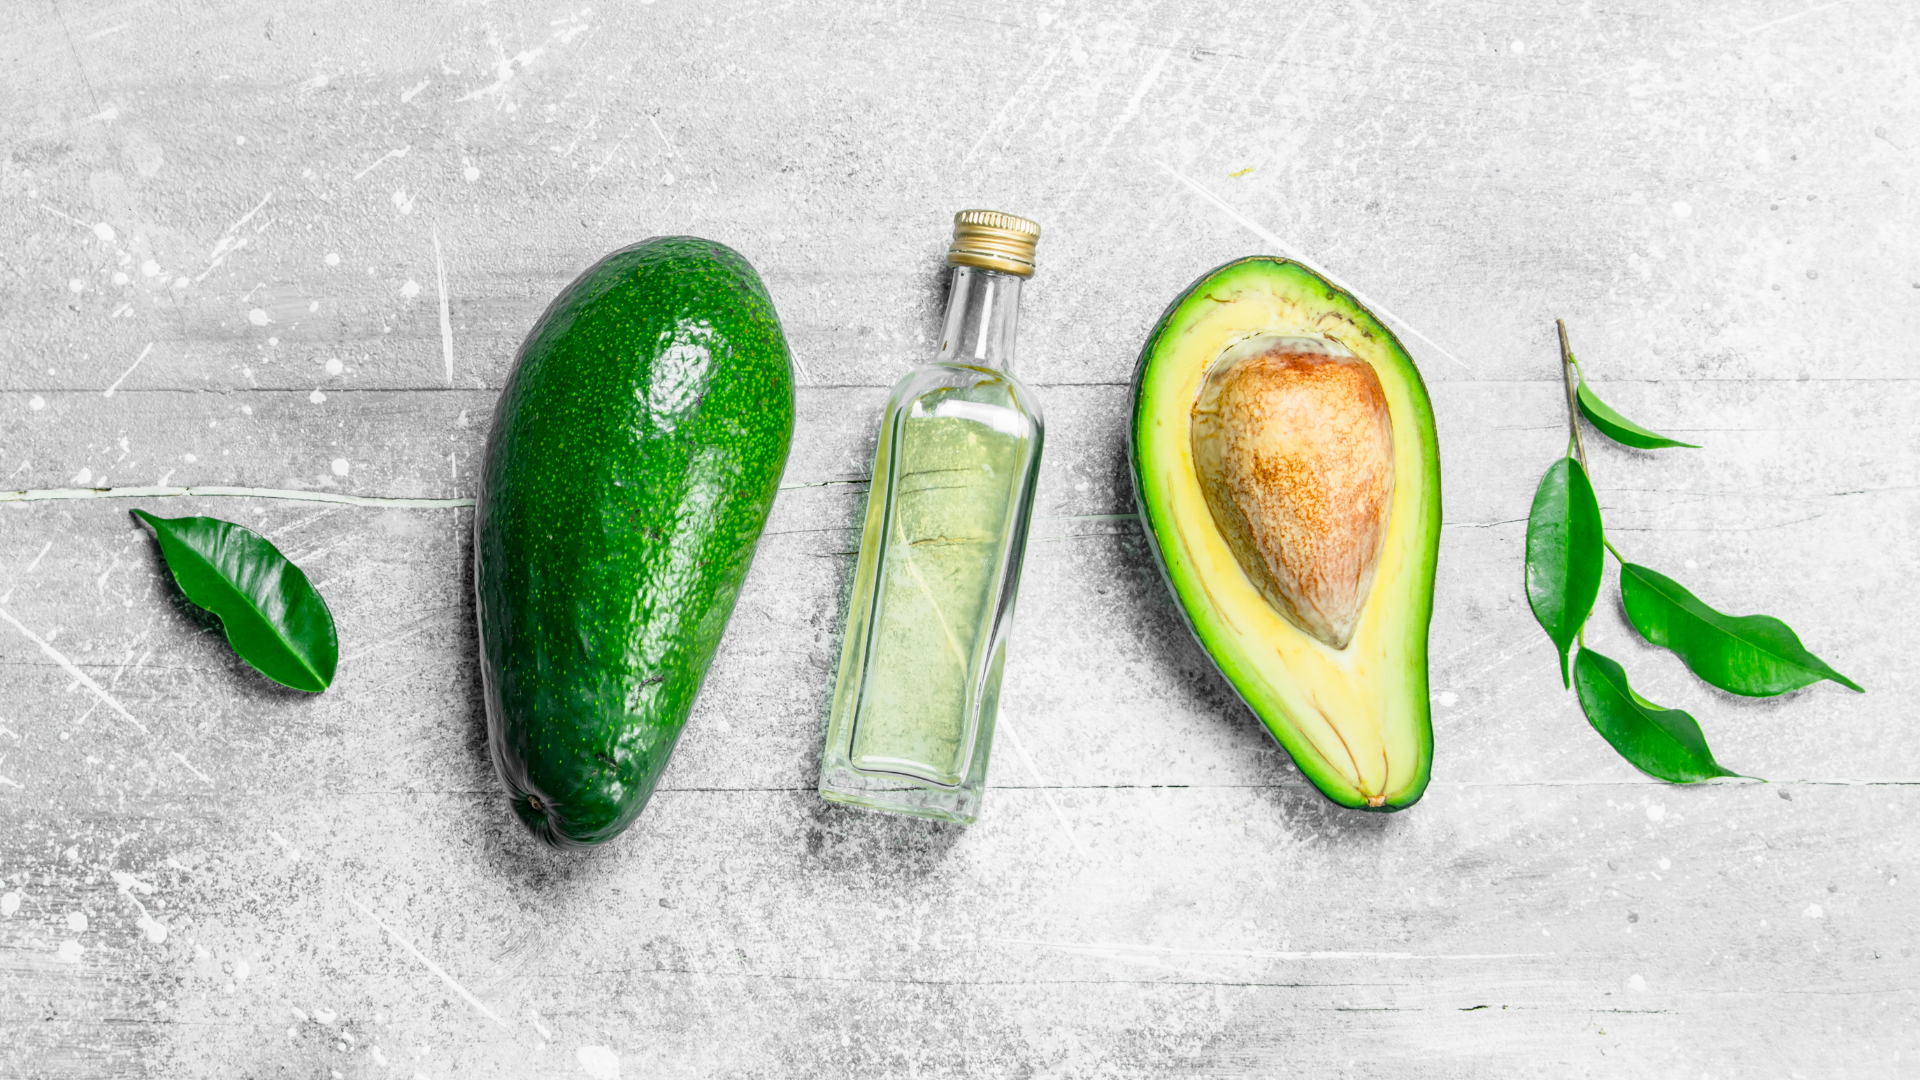 Oil bottle surrounded by avocados and leaves